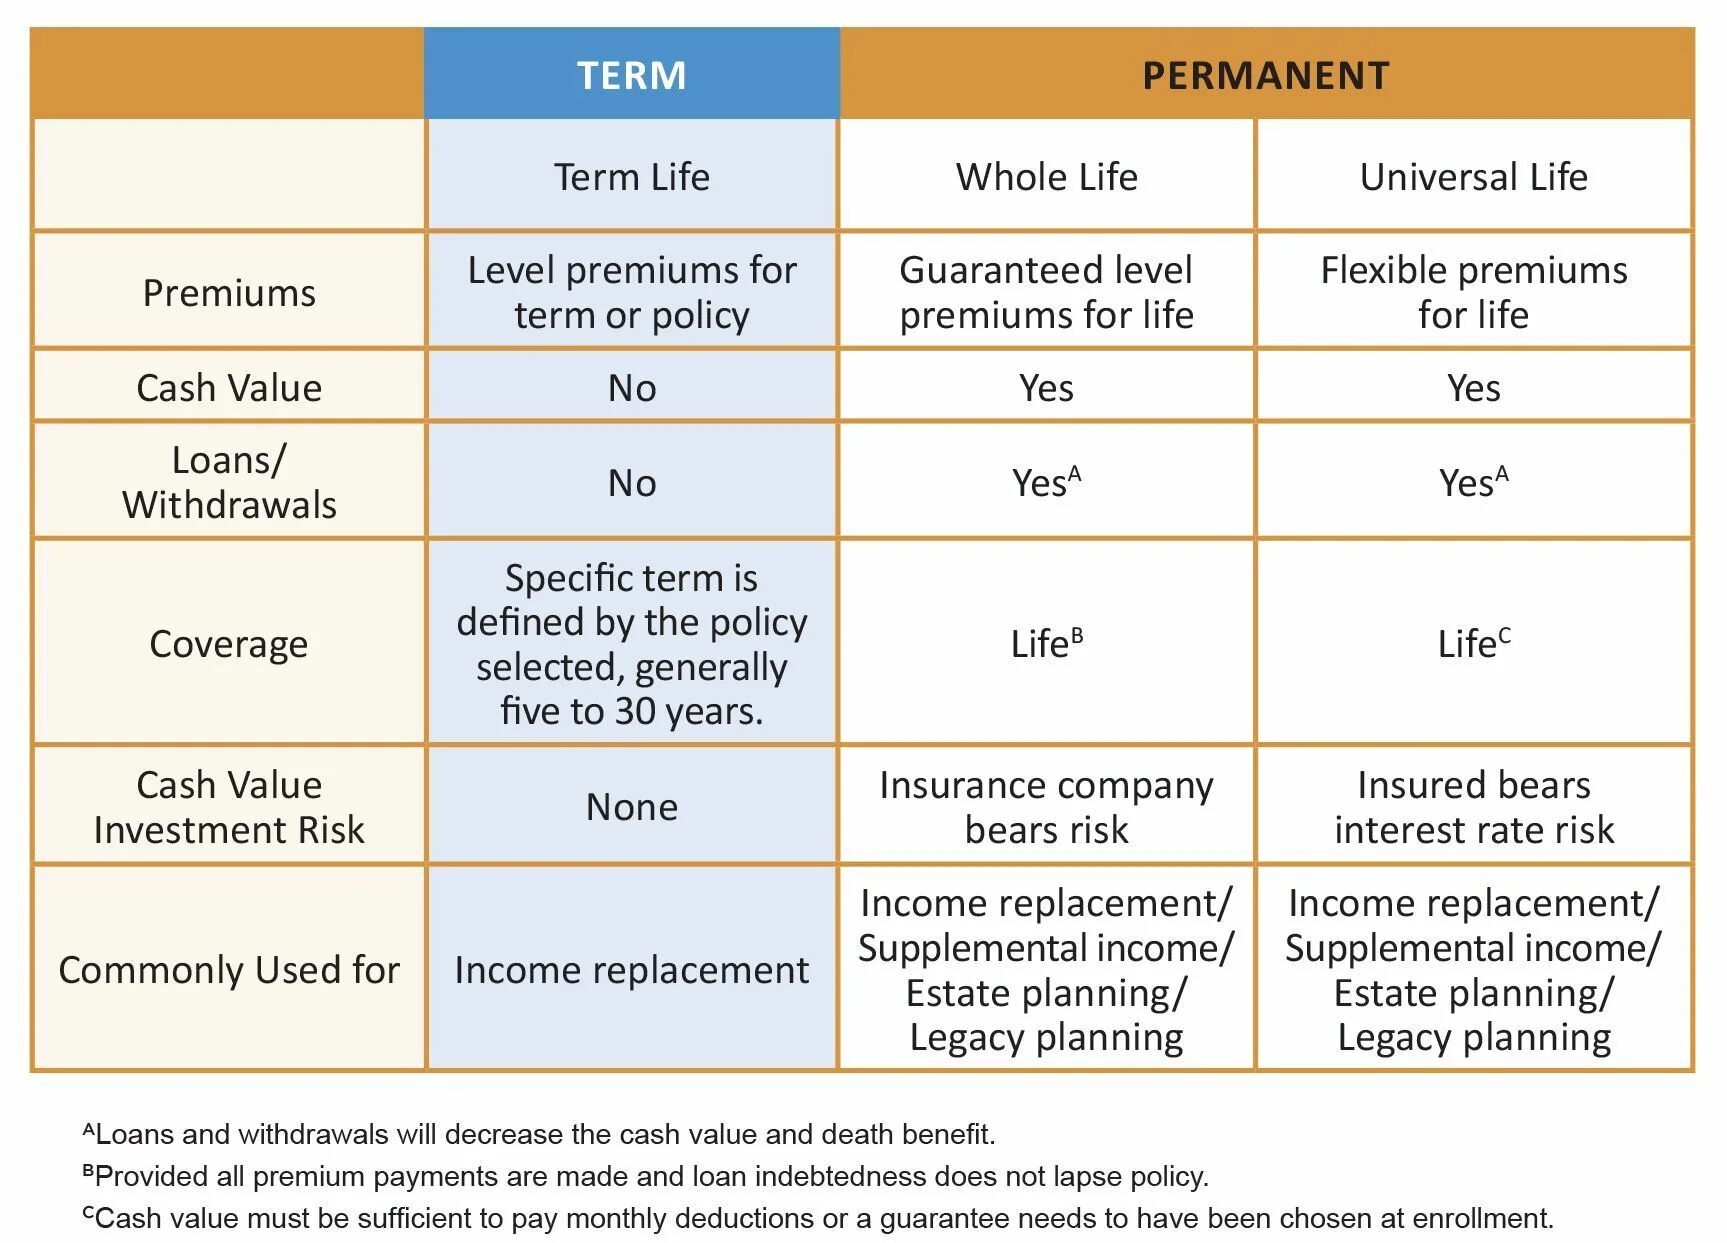 Life is risk. Sil insurance таблица. Comparison Life. LTV loan залоги. Life insurance Policy or current Statement example.